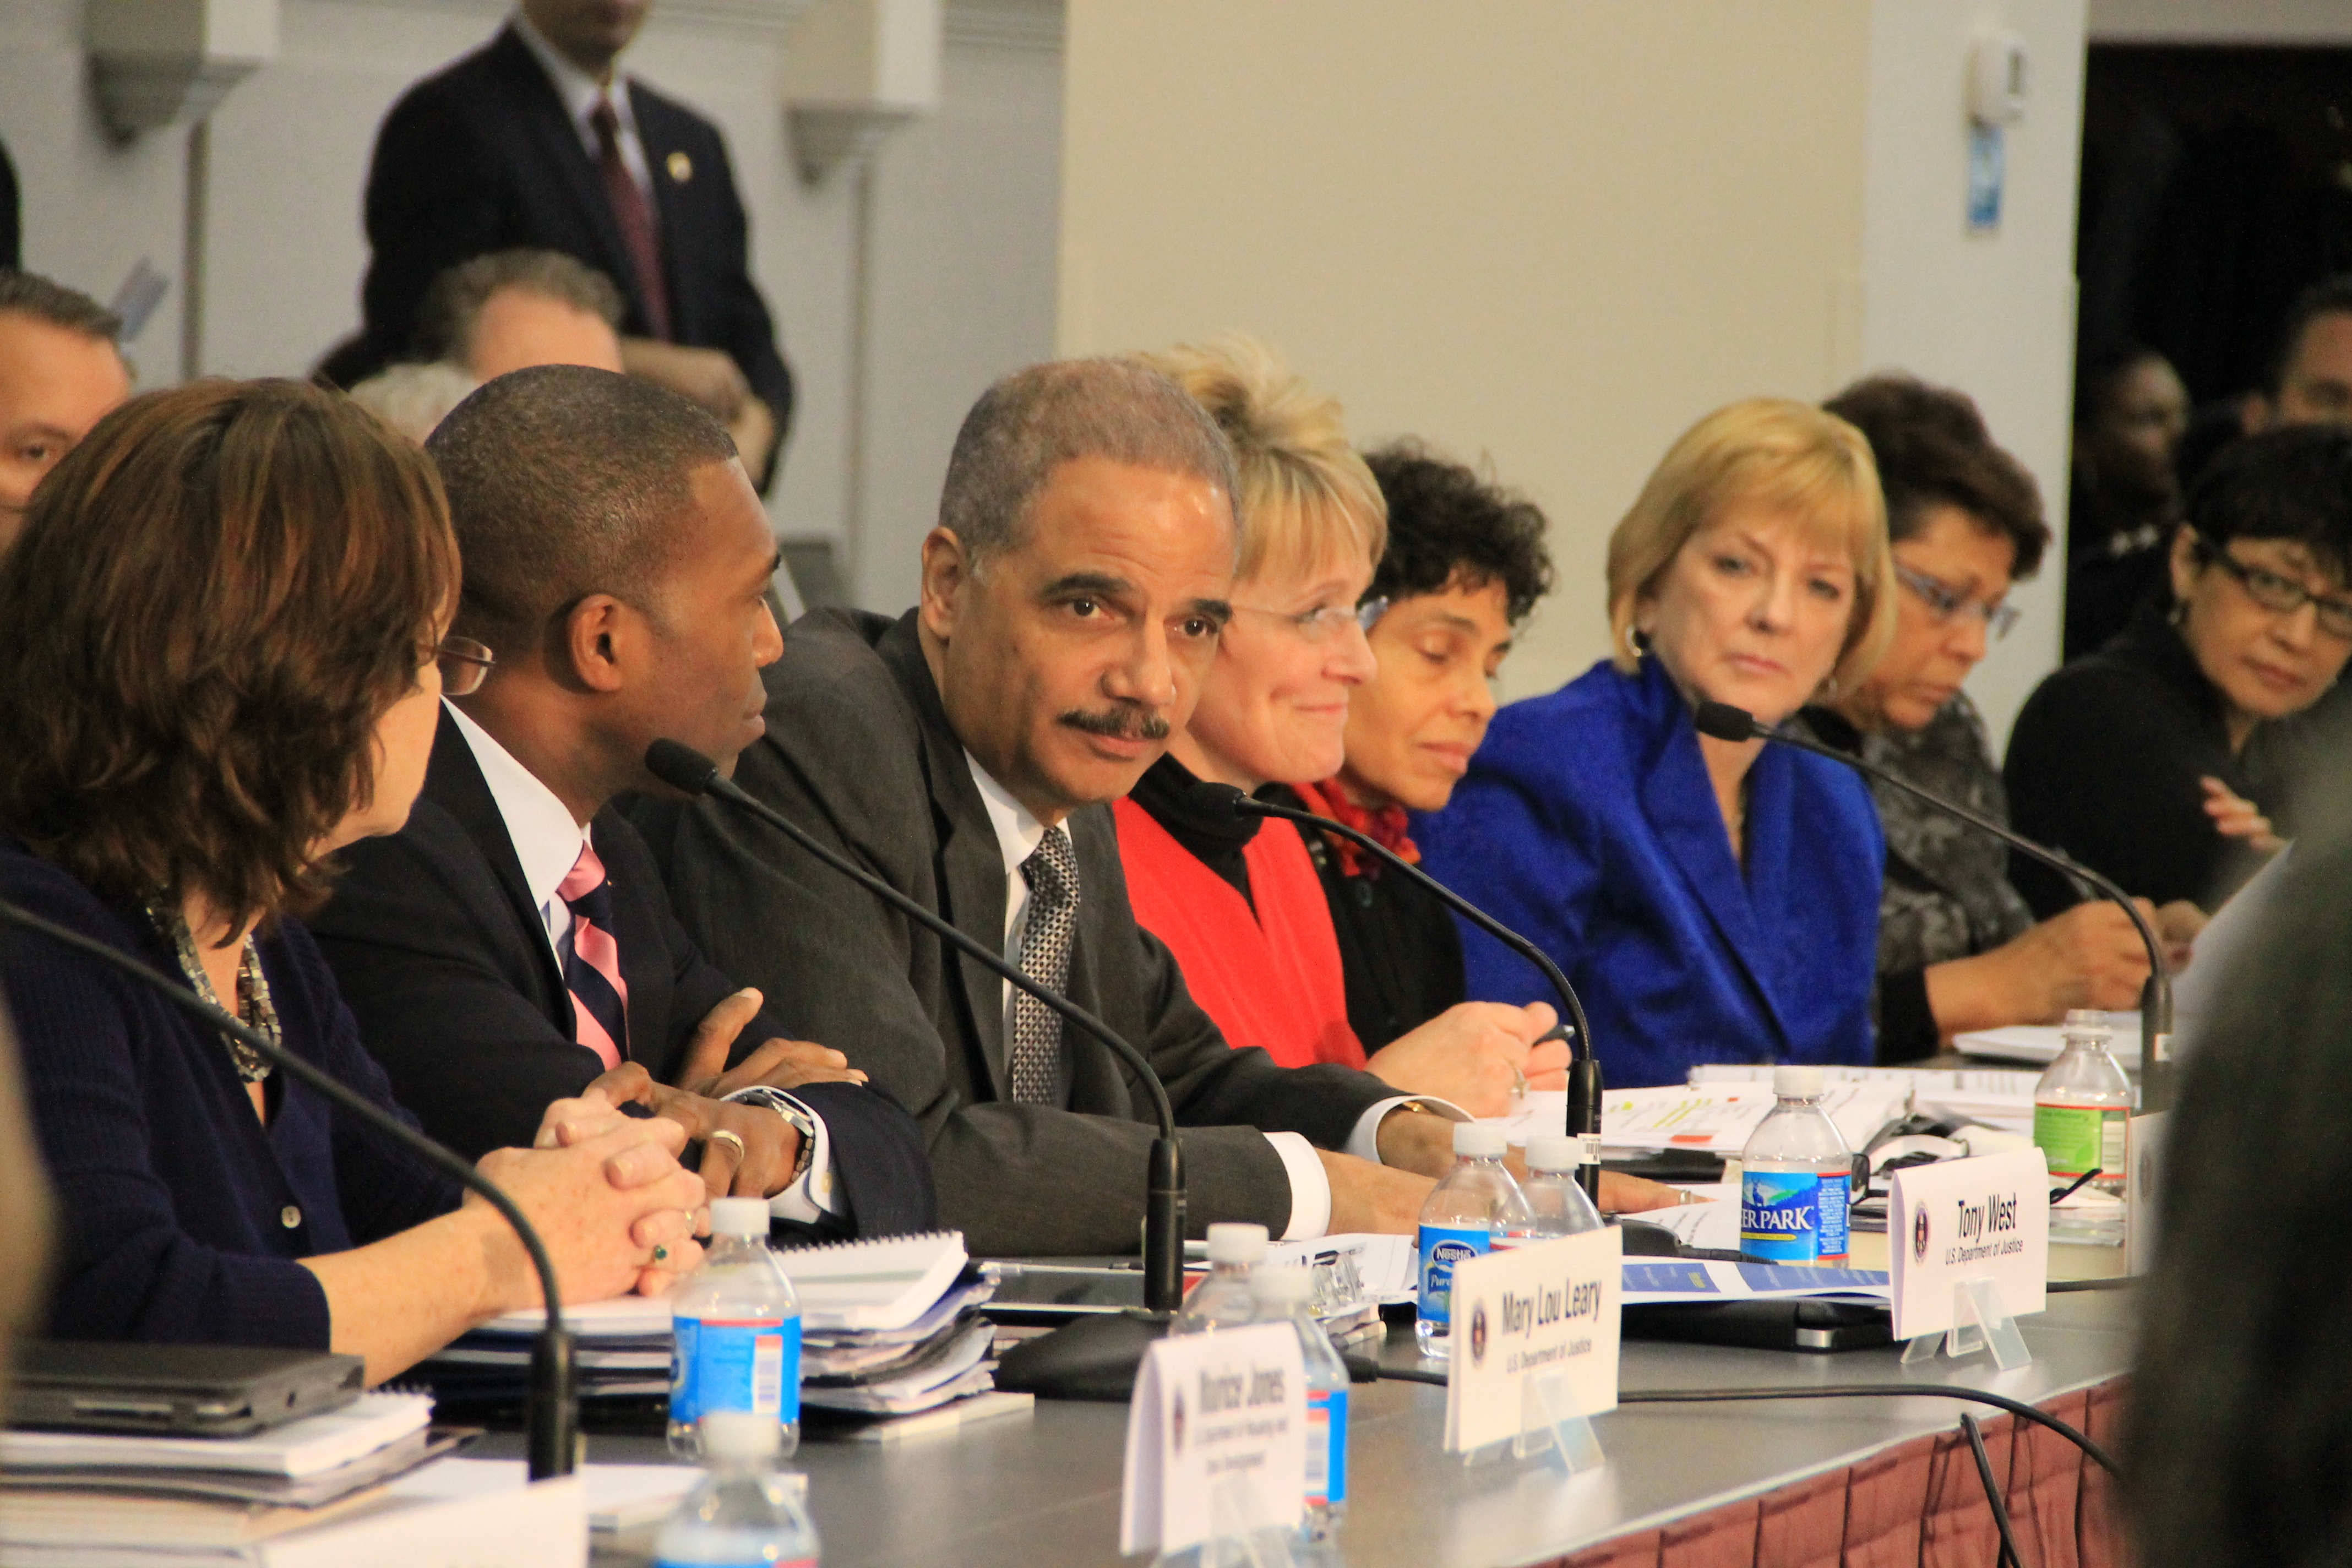 Acting Assistant Attorney General Mary Lou Leary, Acting Associate Attorney General Tony West, U.S. Attorney General Eric Holder and Acting Administrator of the OJJDP, Melodee Hanes, at a federal interagency meeting on juvenile justice Wednesday